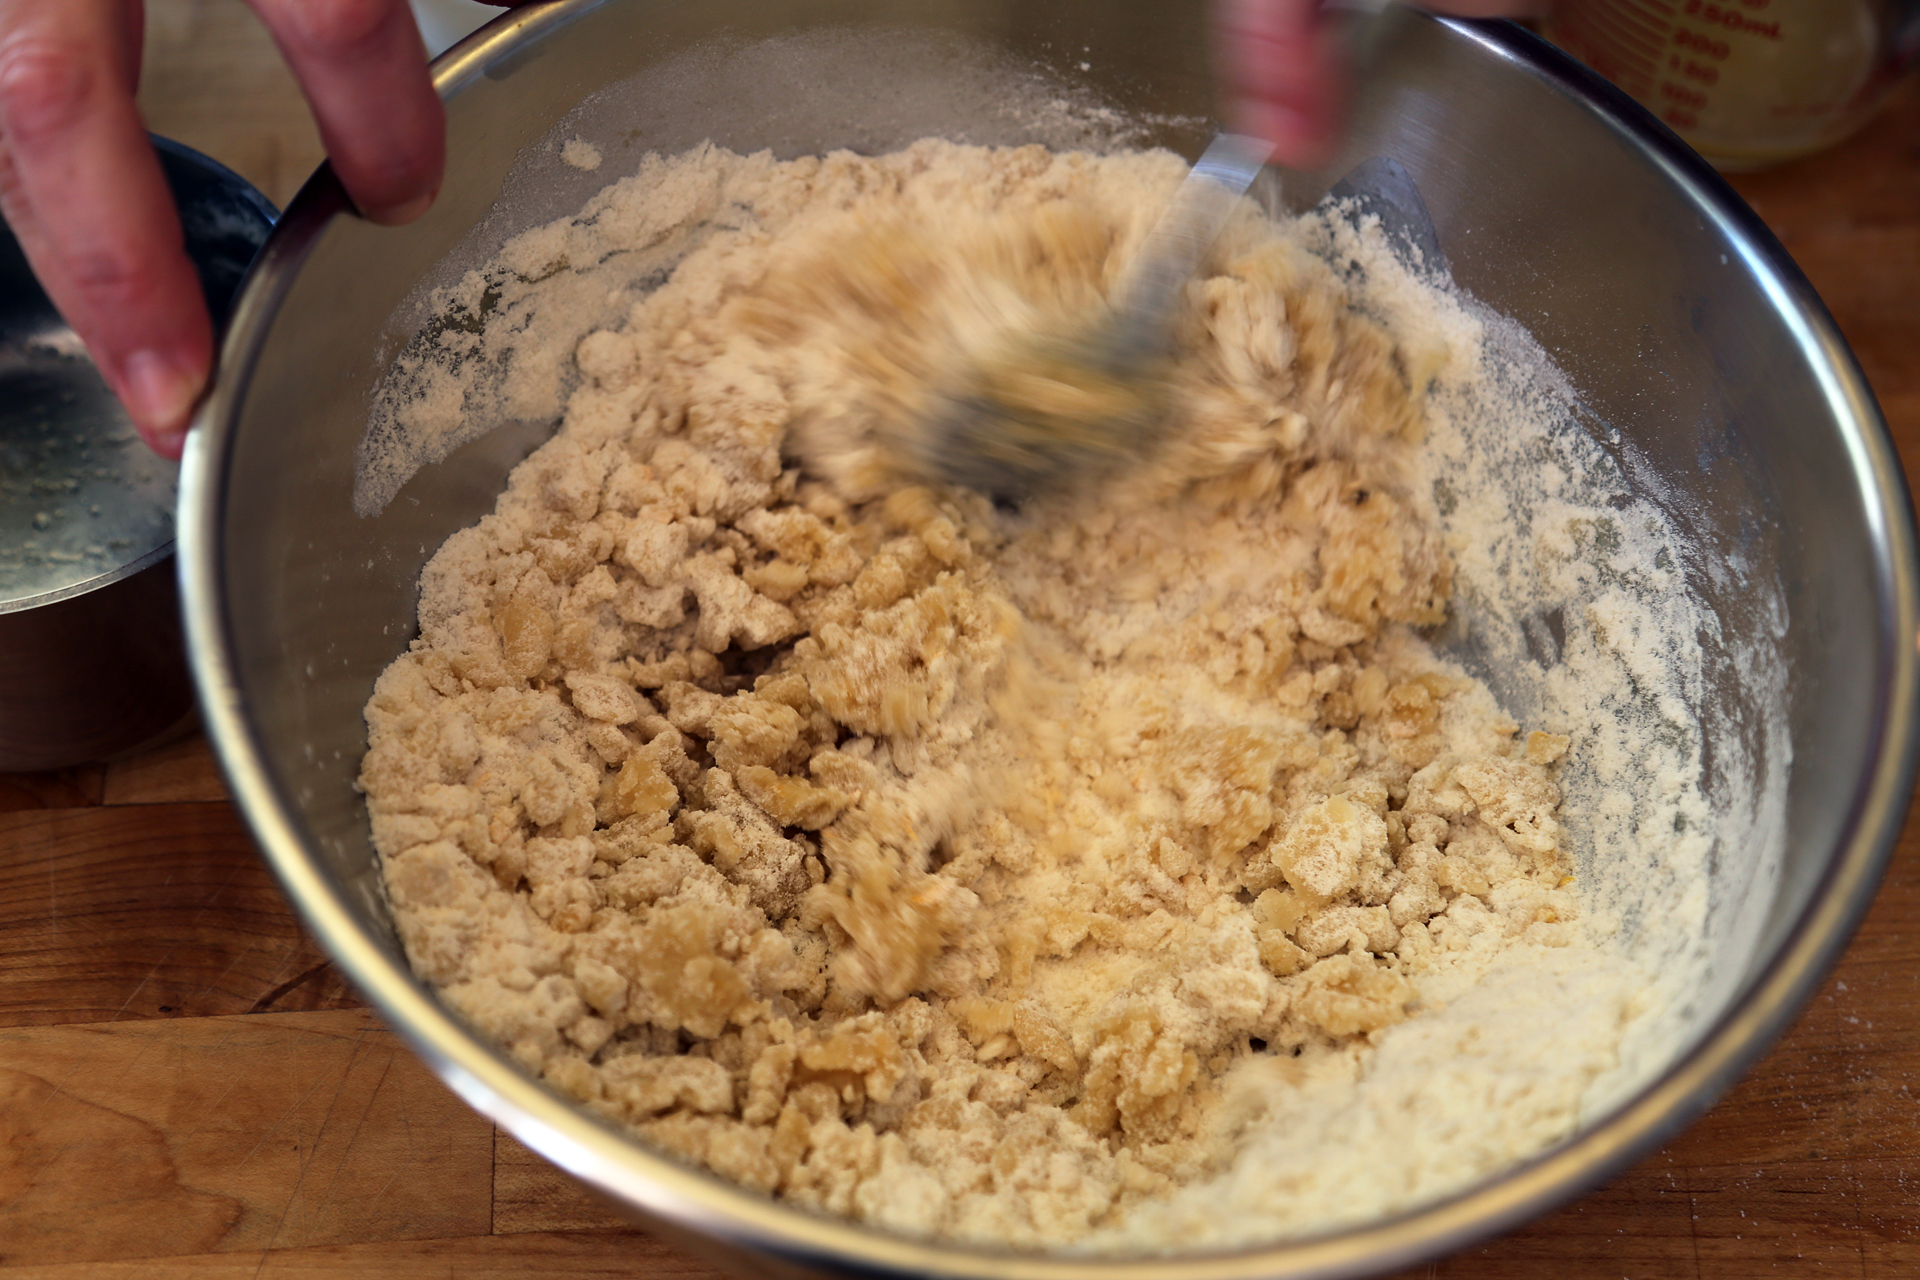 Add the butter mixture to the flour mixture and stir to combine.